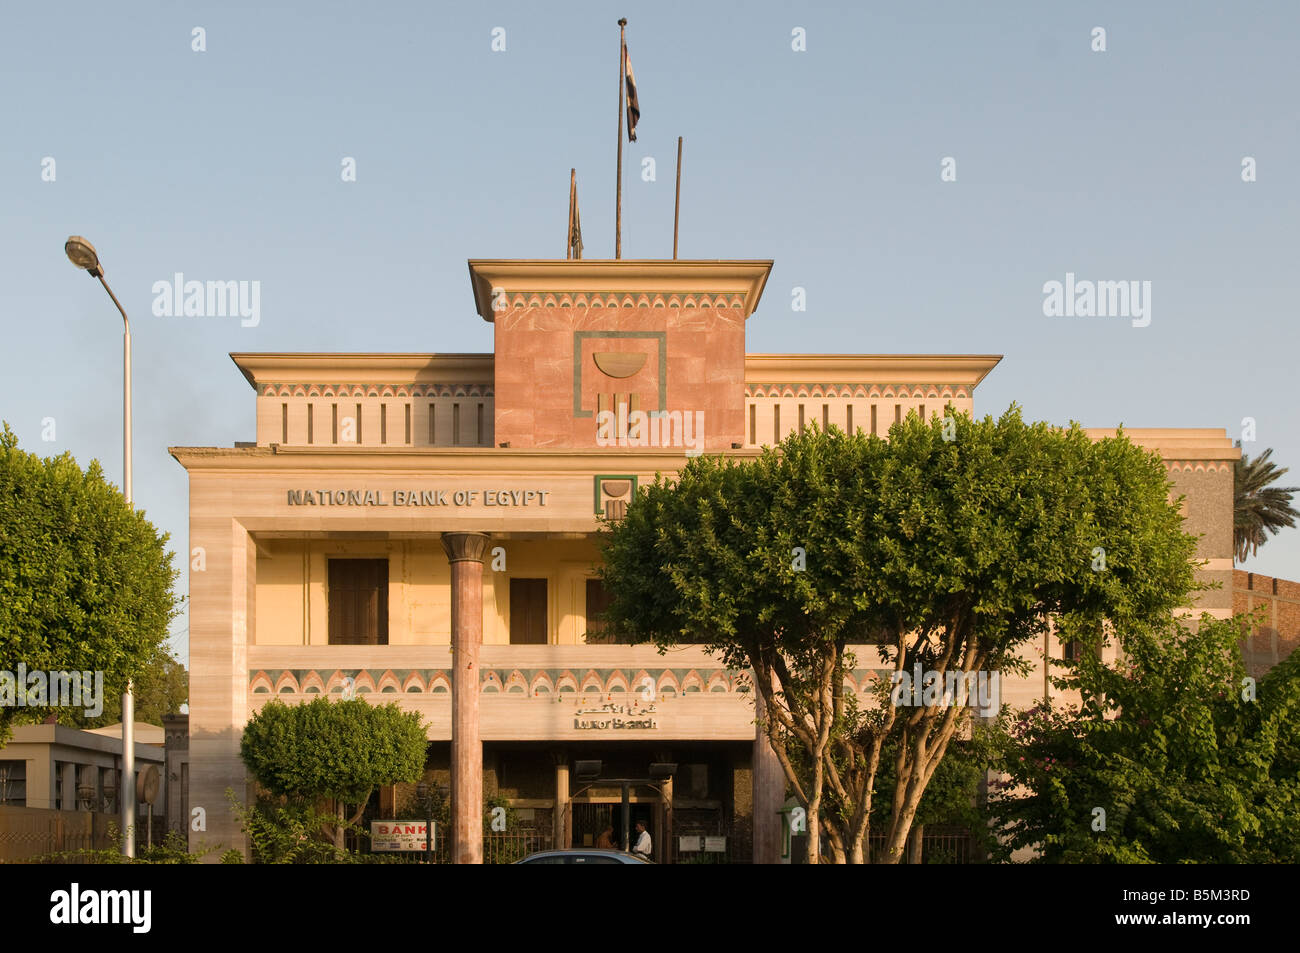 Exterior of NBE 'National Bank of Egypt' in Luxor the oldest and largest bank in Egypt Stock Photo